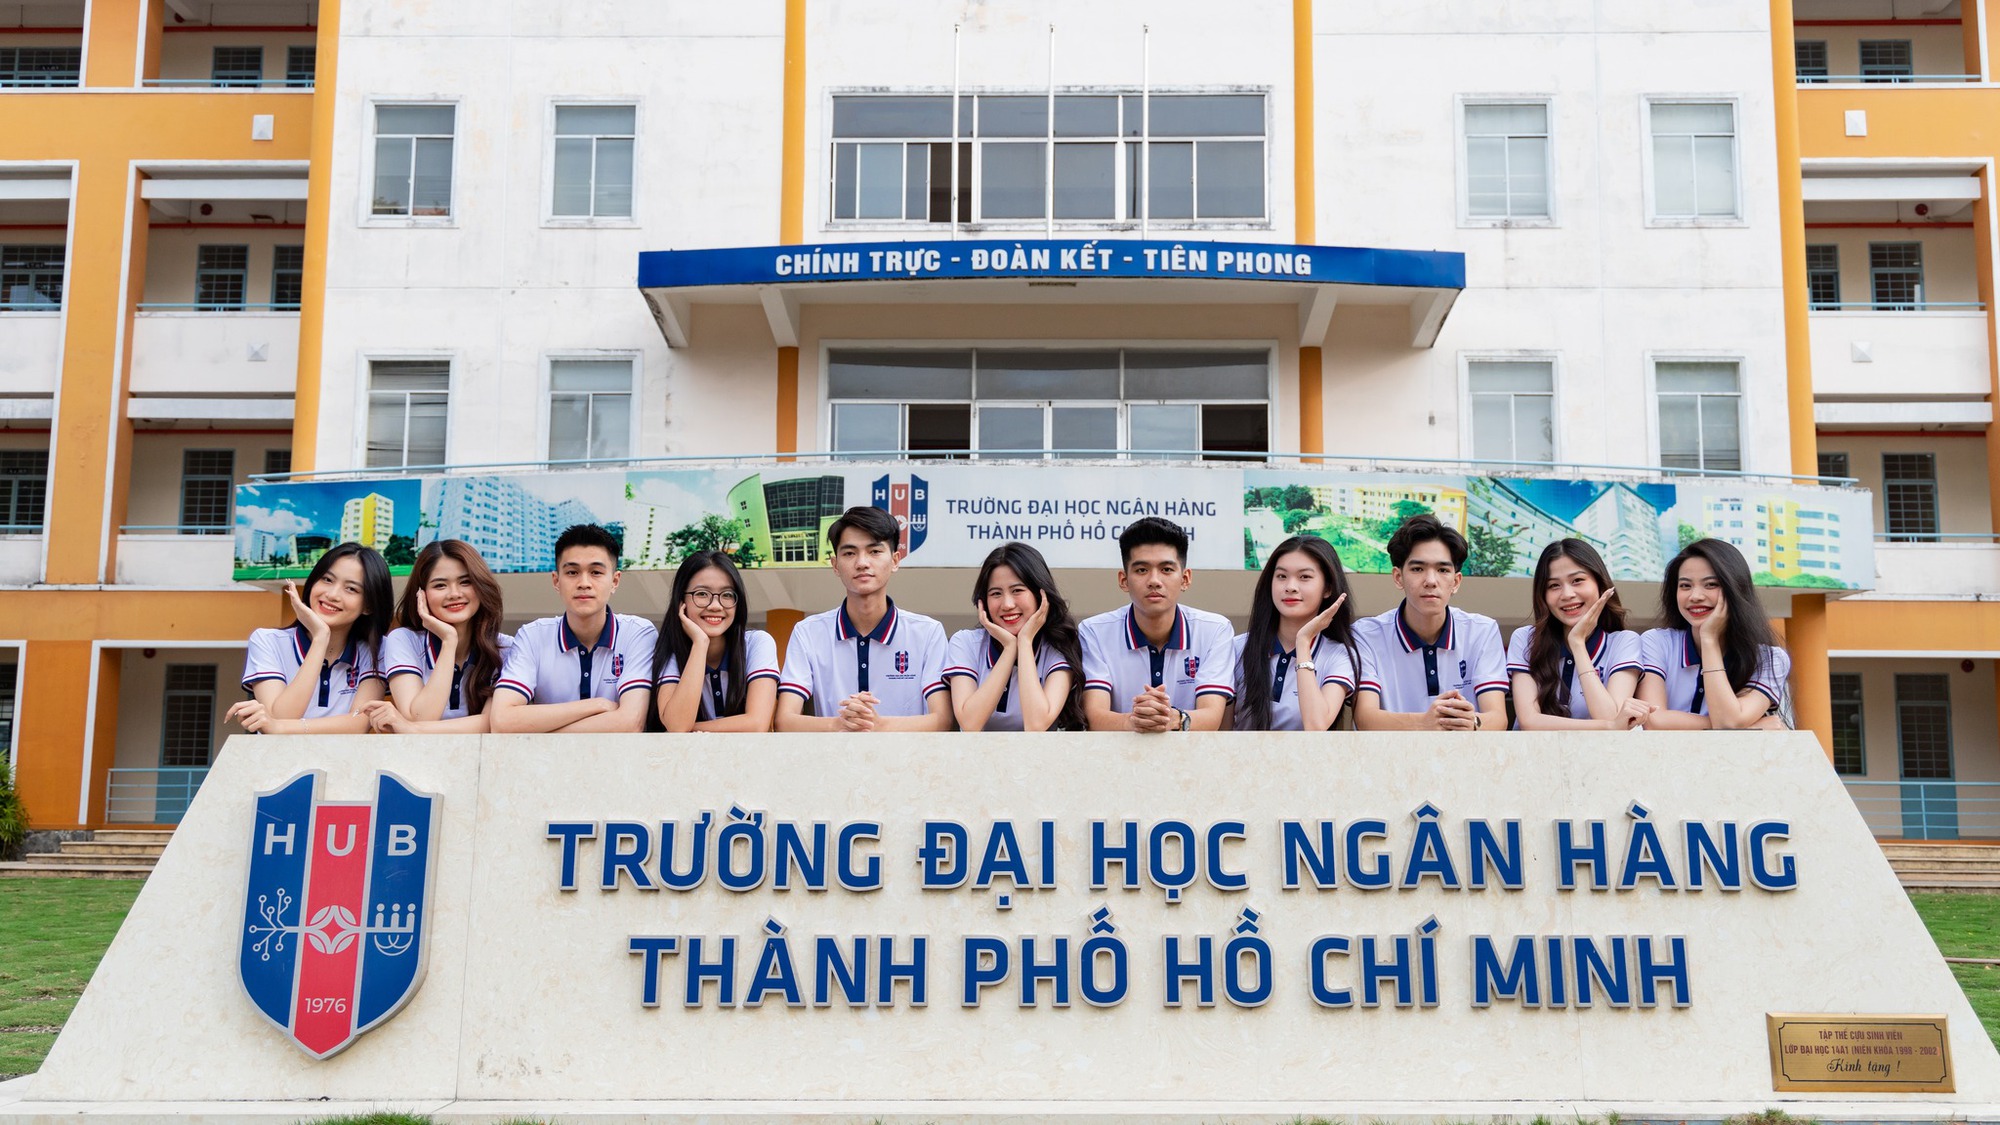 Ho Chi Minh City University of Banking is a public service unit under the State Bank of Vietnam